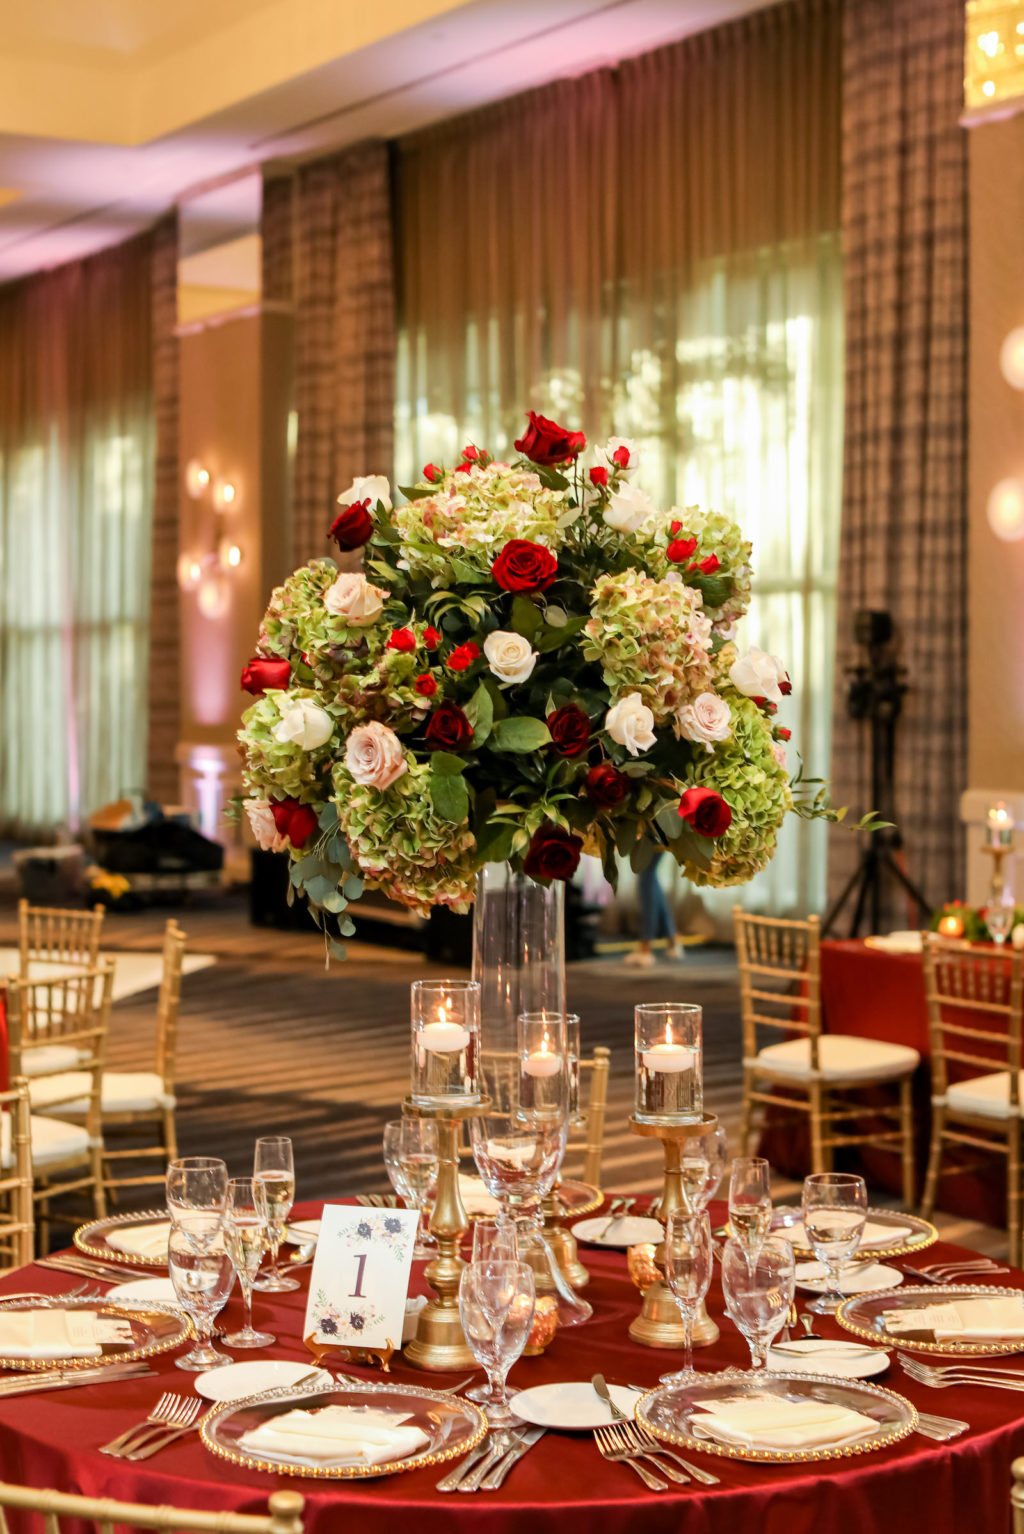 Indian Hindu Wedding Ballroom Reception Decor, Round Table with Burgundy Red Table Linen, Floating Candlesticks, Tall Floral Centerpiece, Green Hydrangeas, Red and White Roses, Gold Chiavari Chairs | Tampa Bay Wedding Photographer Lifelong Photography Studios | Wedding Venue Grand Hyatt Tampa Bay